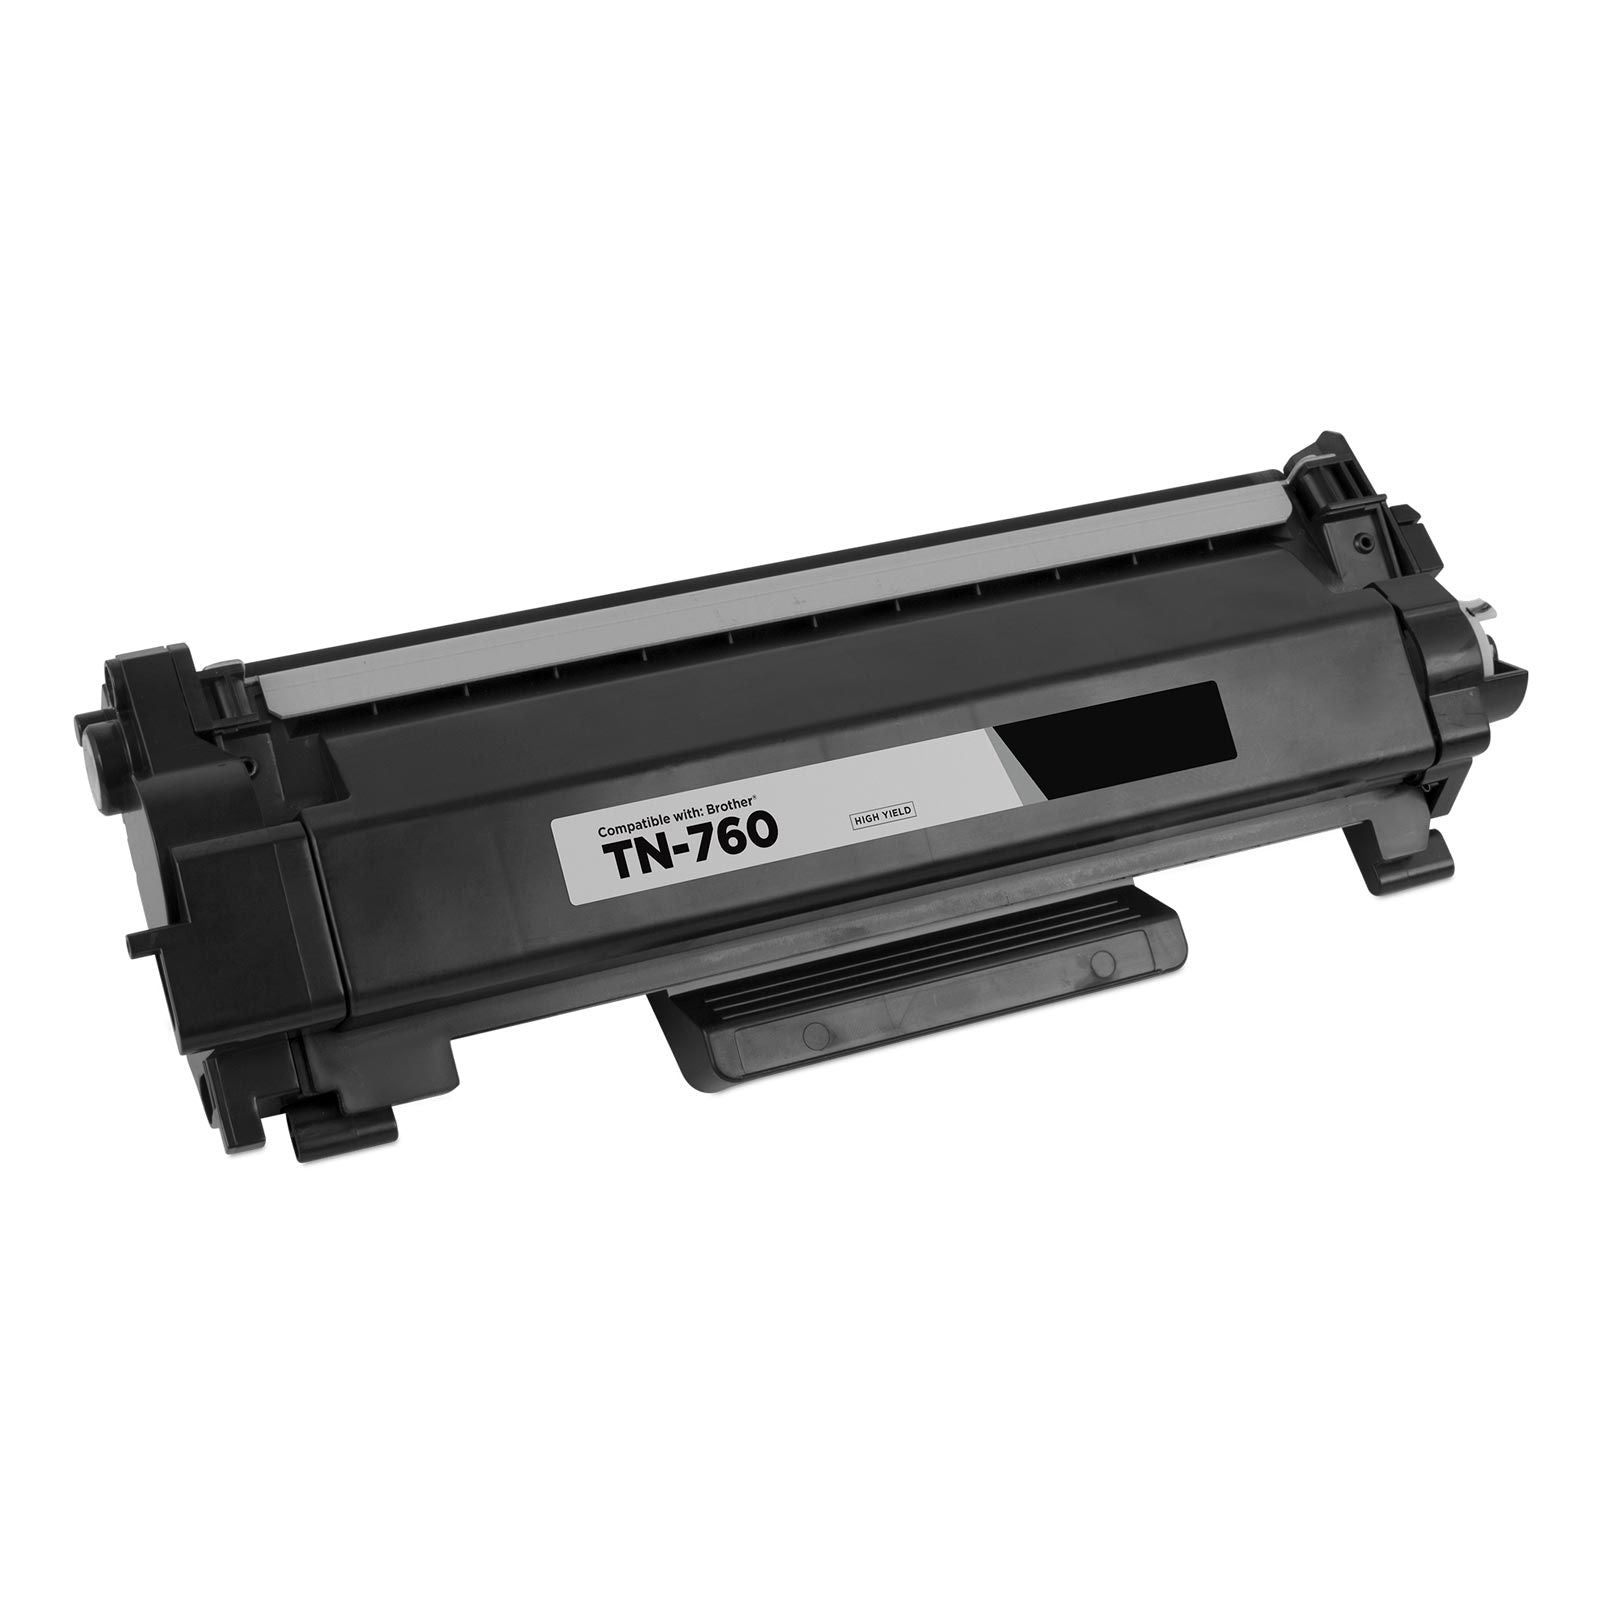 TN760 5 PACK IMPERIAL BRAND BROTHER TN760 TONER CARTRIDGE 3,000 PAGES